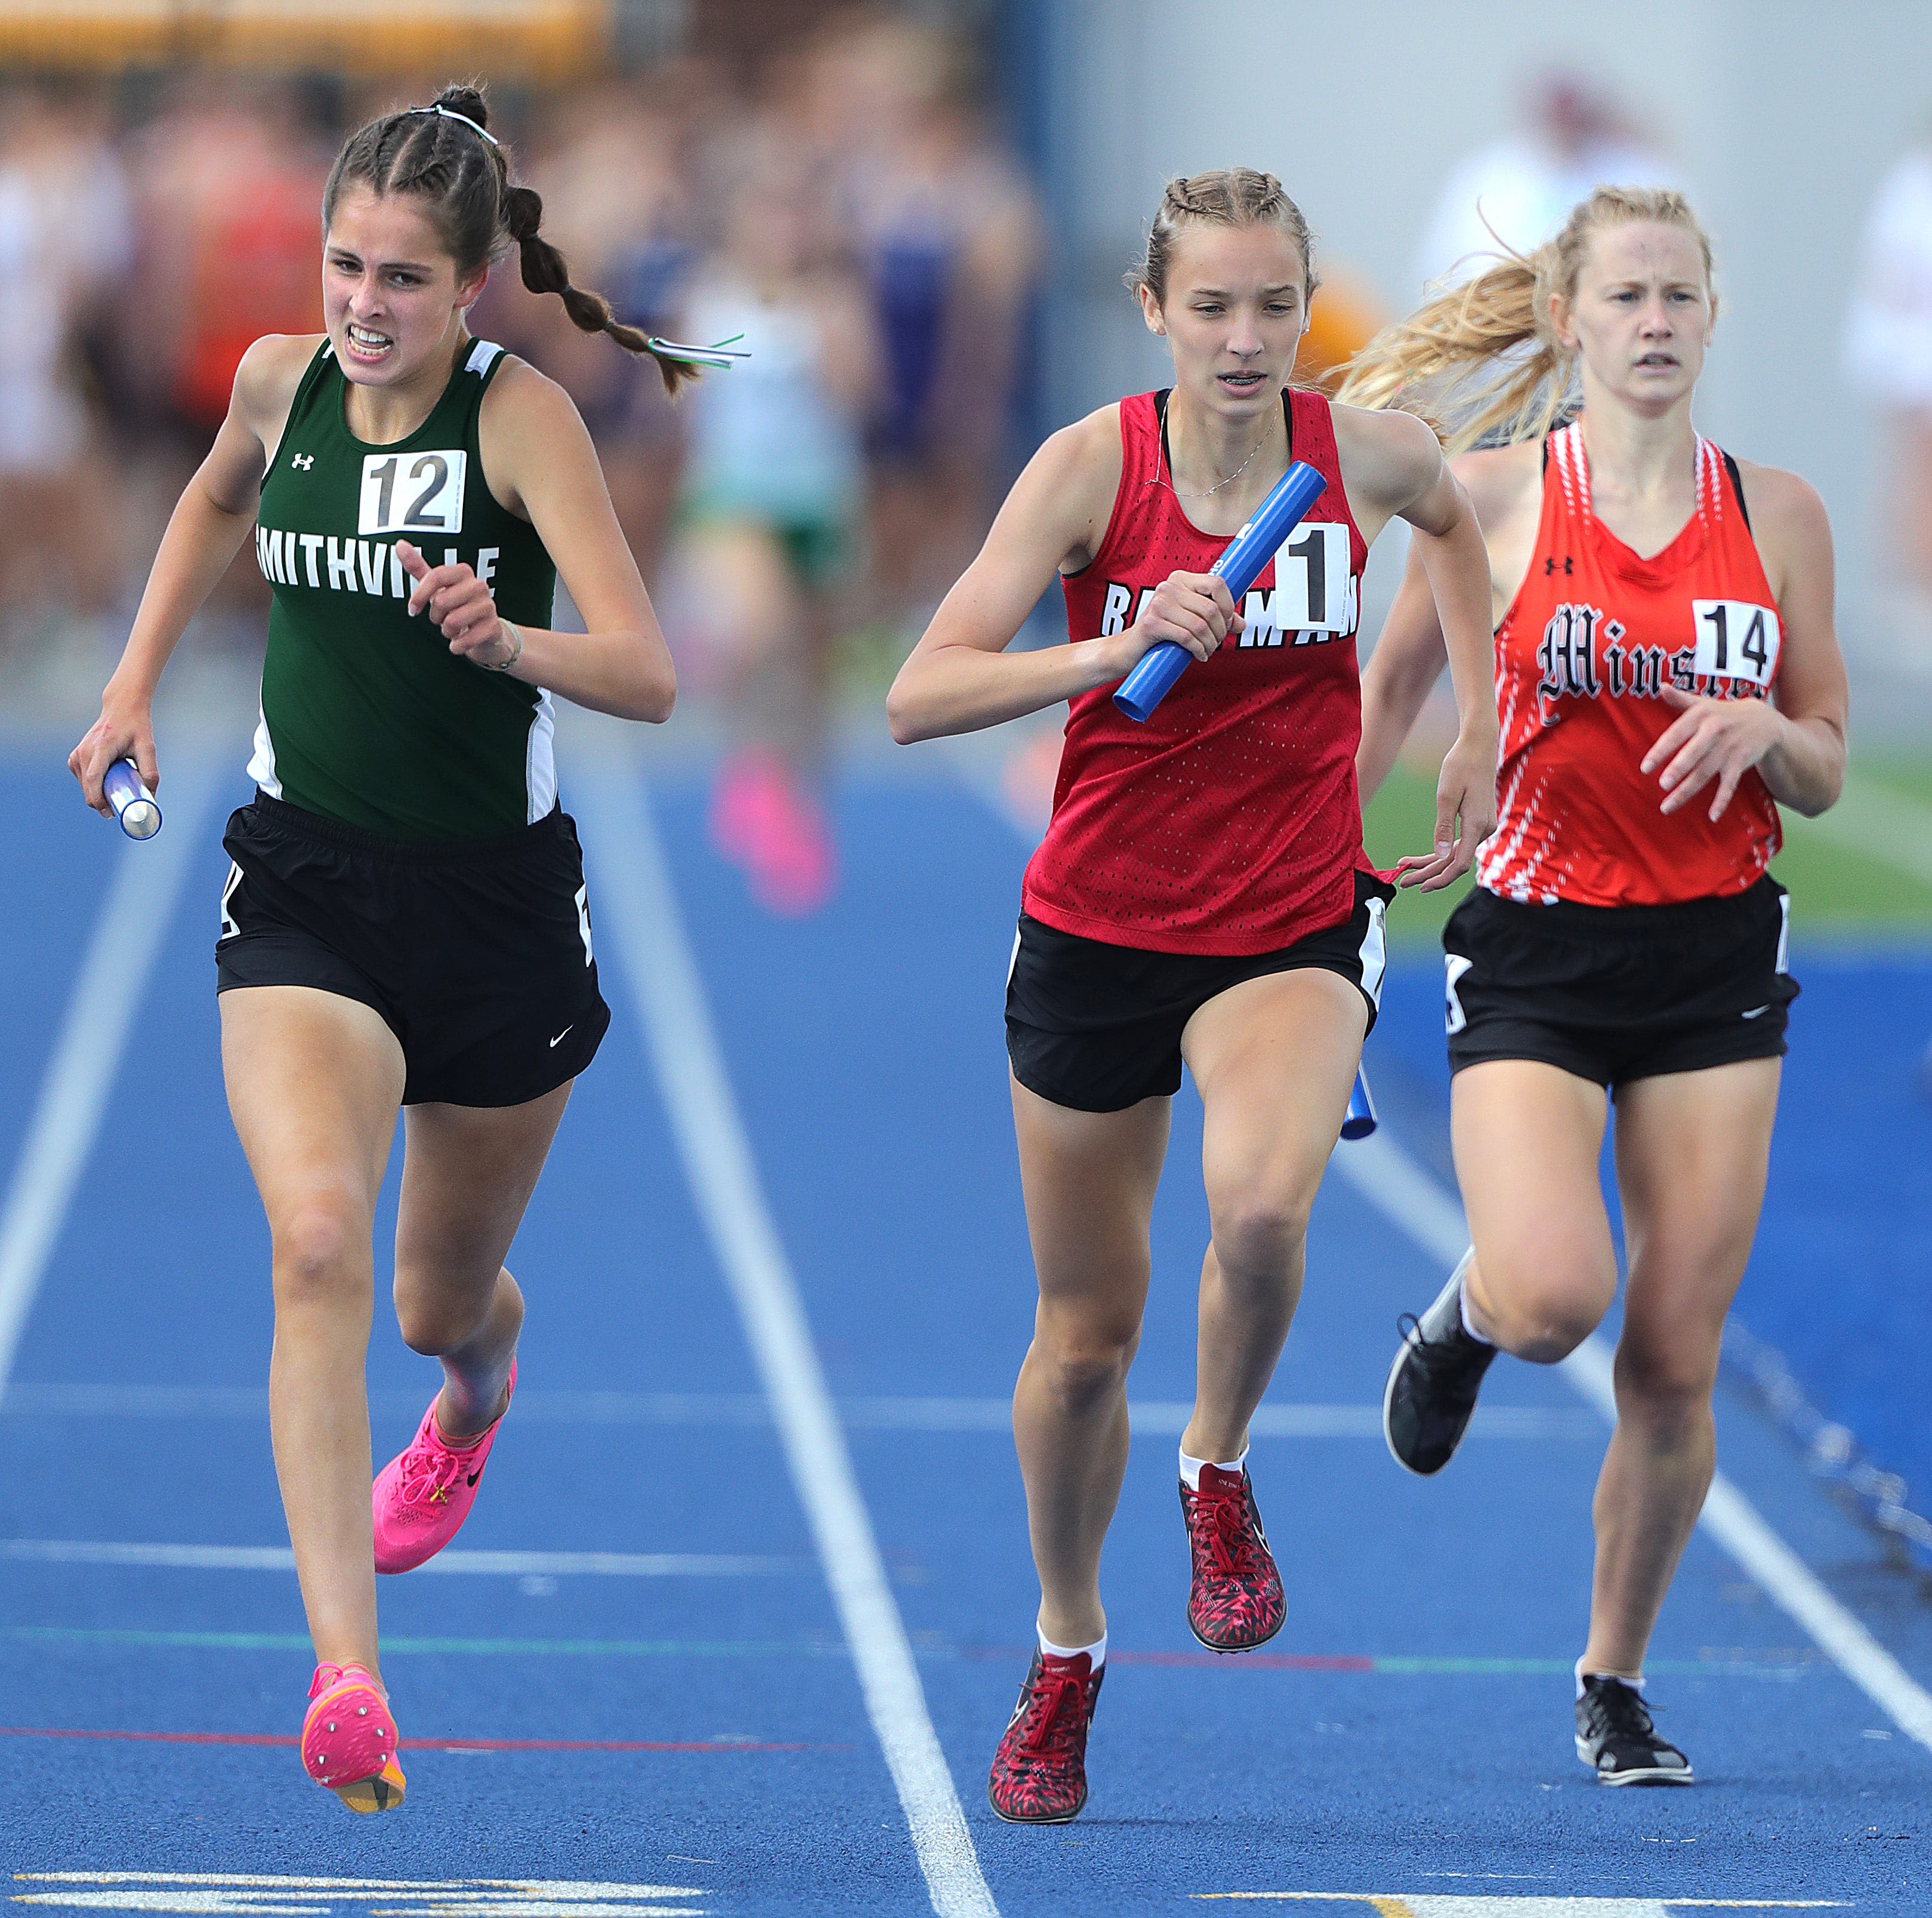 'It feels really great': Rittman's state runner-up 4x800 relay leaves it all on the track